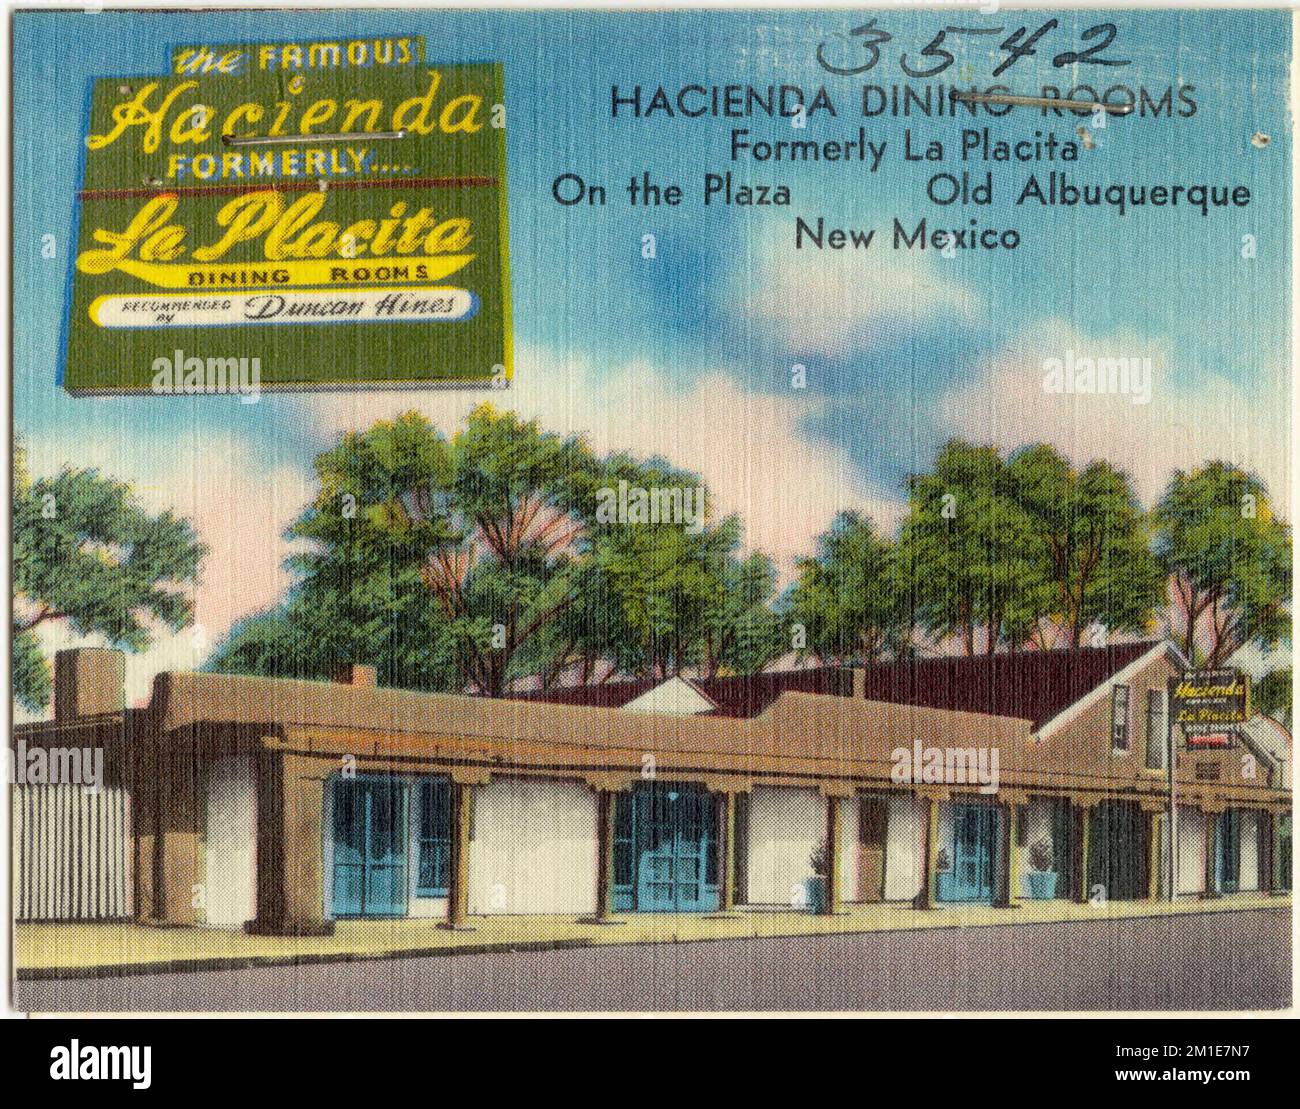 Hacienda dinning rooms, formerly La Placita, on the plaza, Old Albuquerque, New Mexico , Restaurants, Tichnor Brothers Collection, postcards of the United States Stock Photo